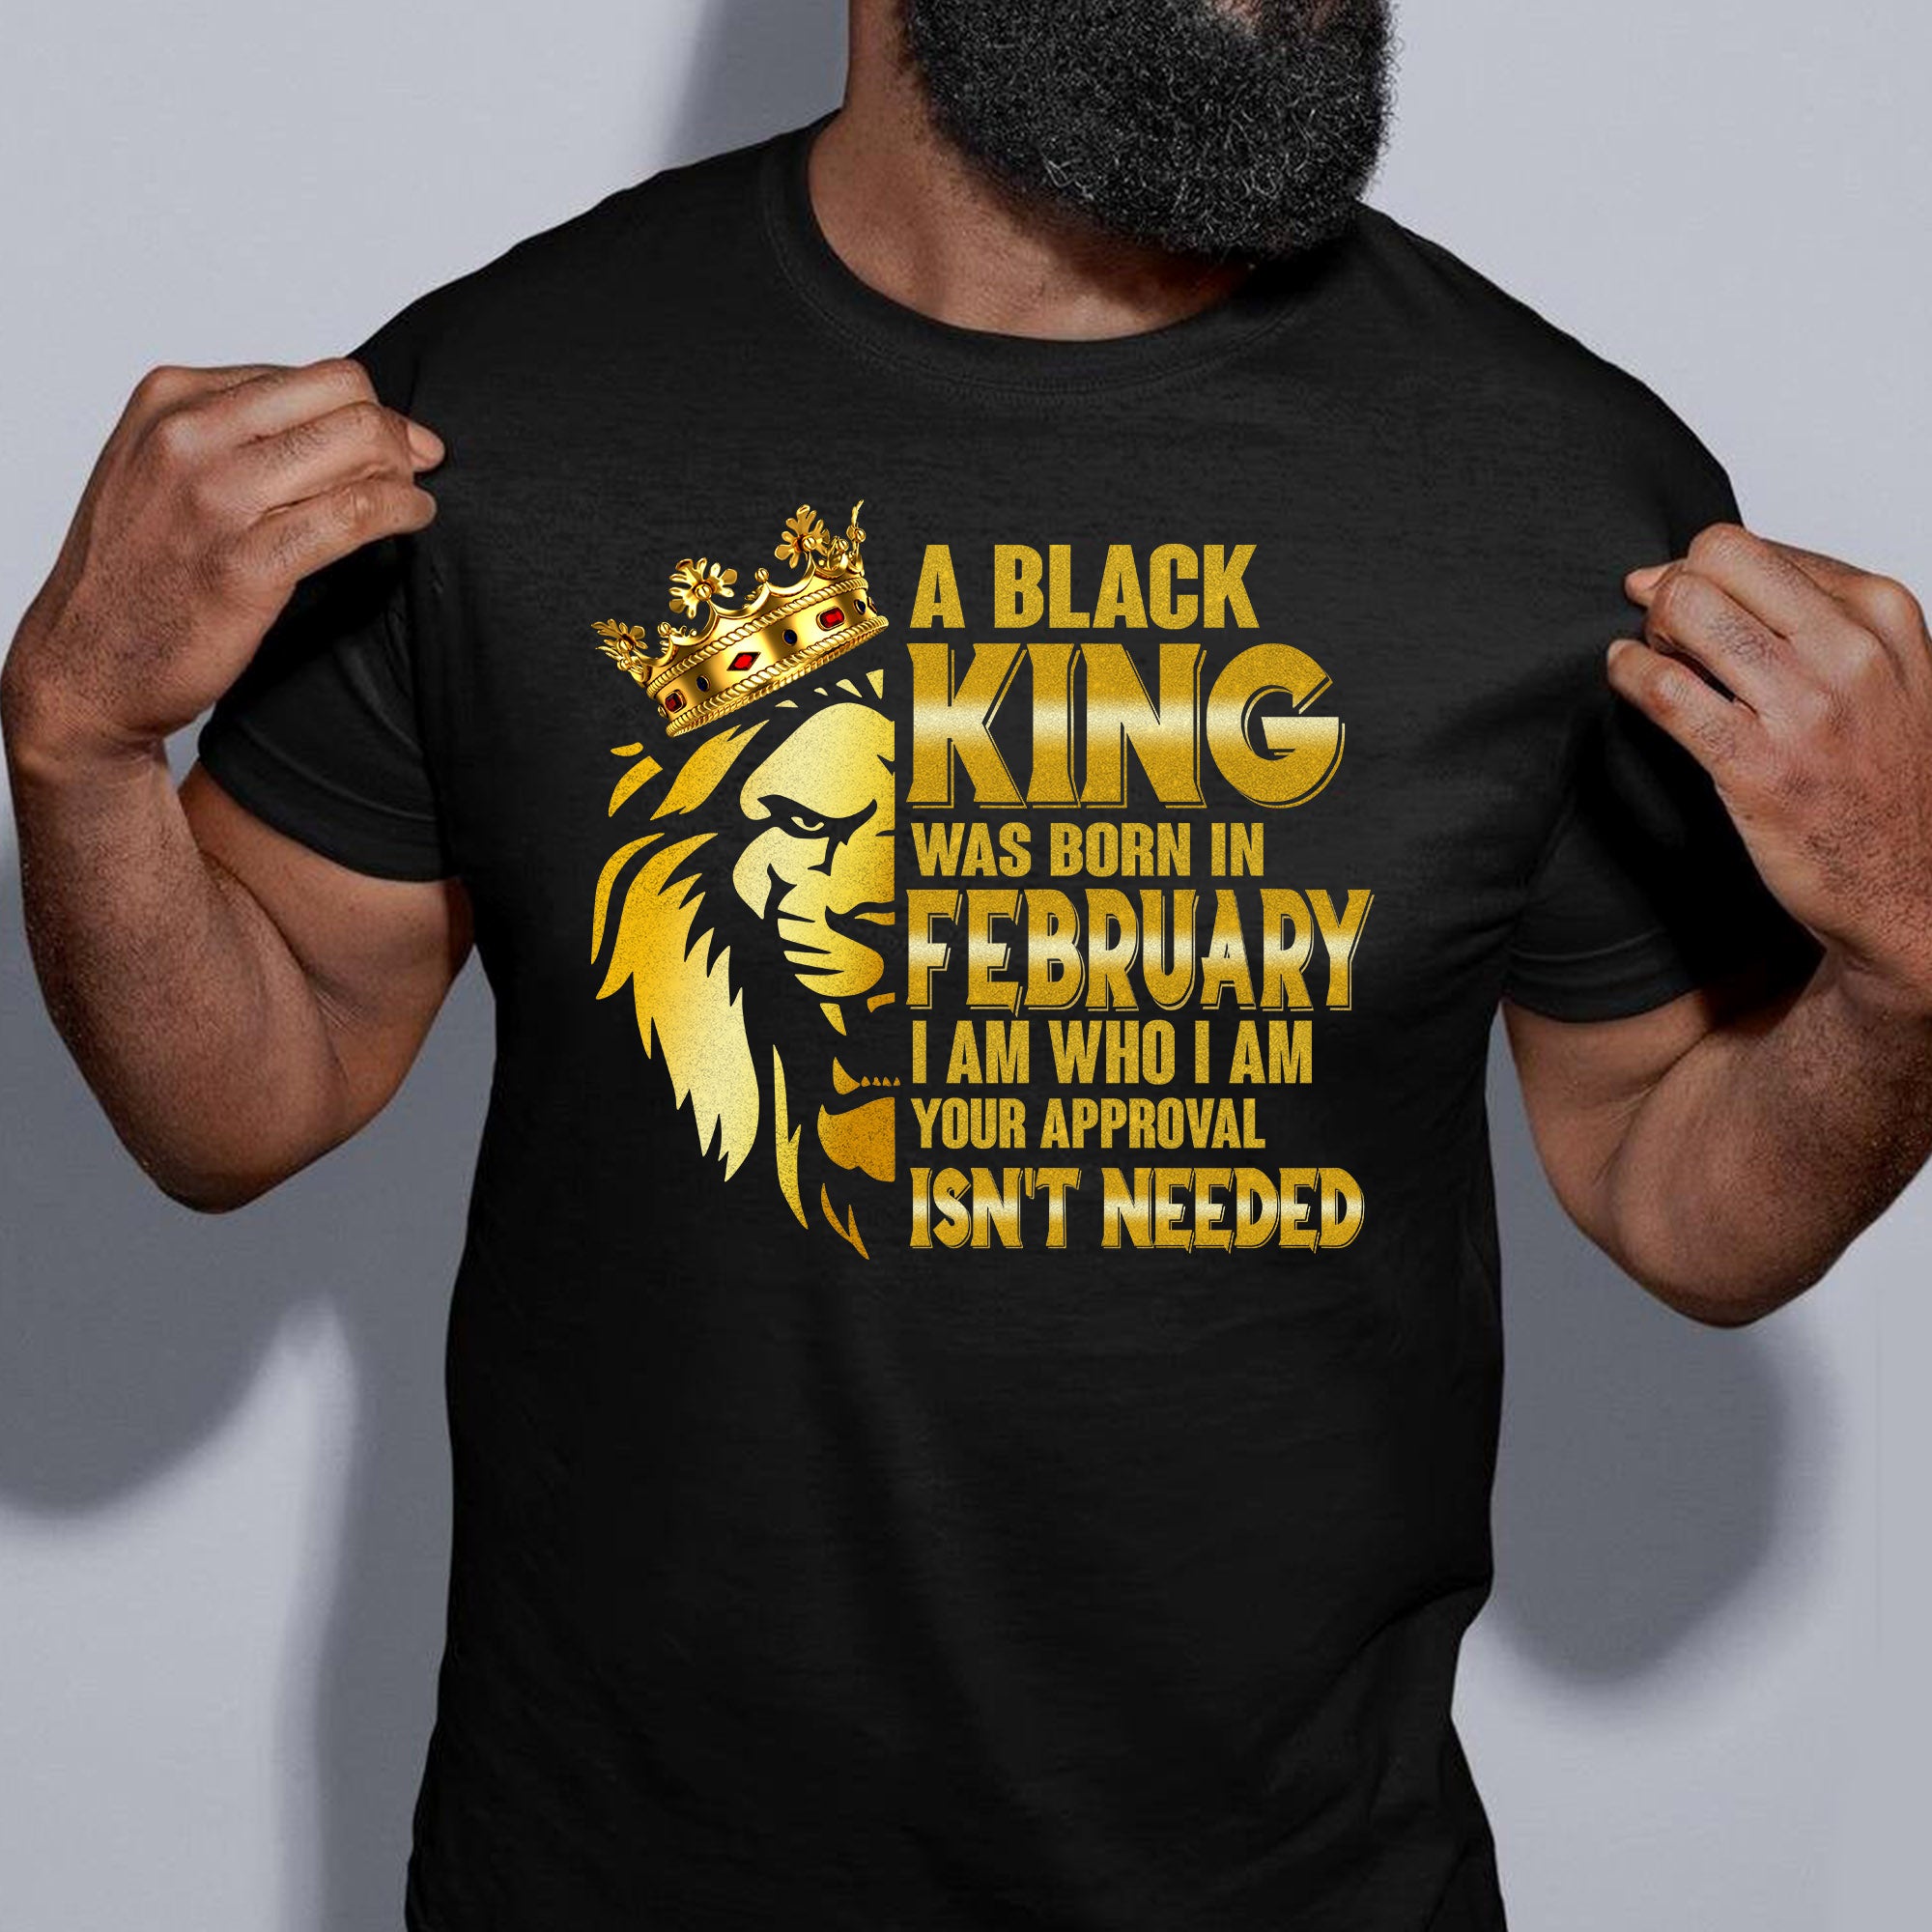 A Black King Was Born In February T-Shirt